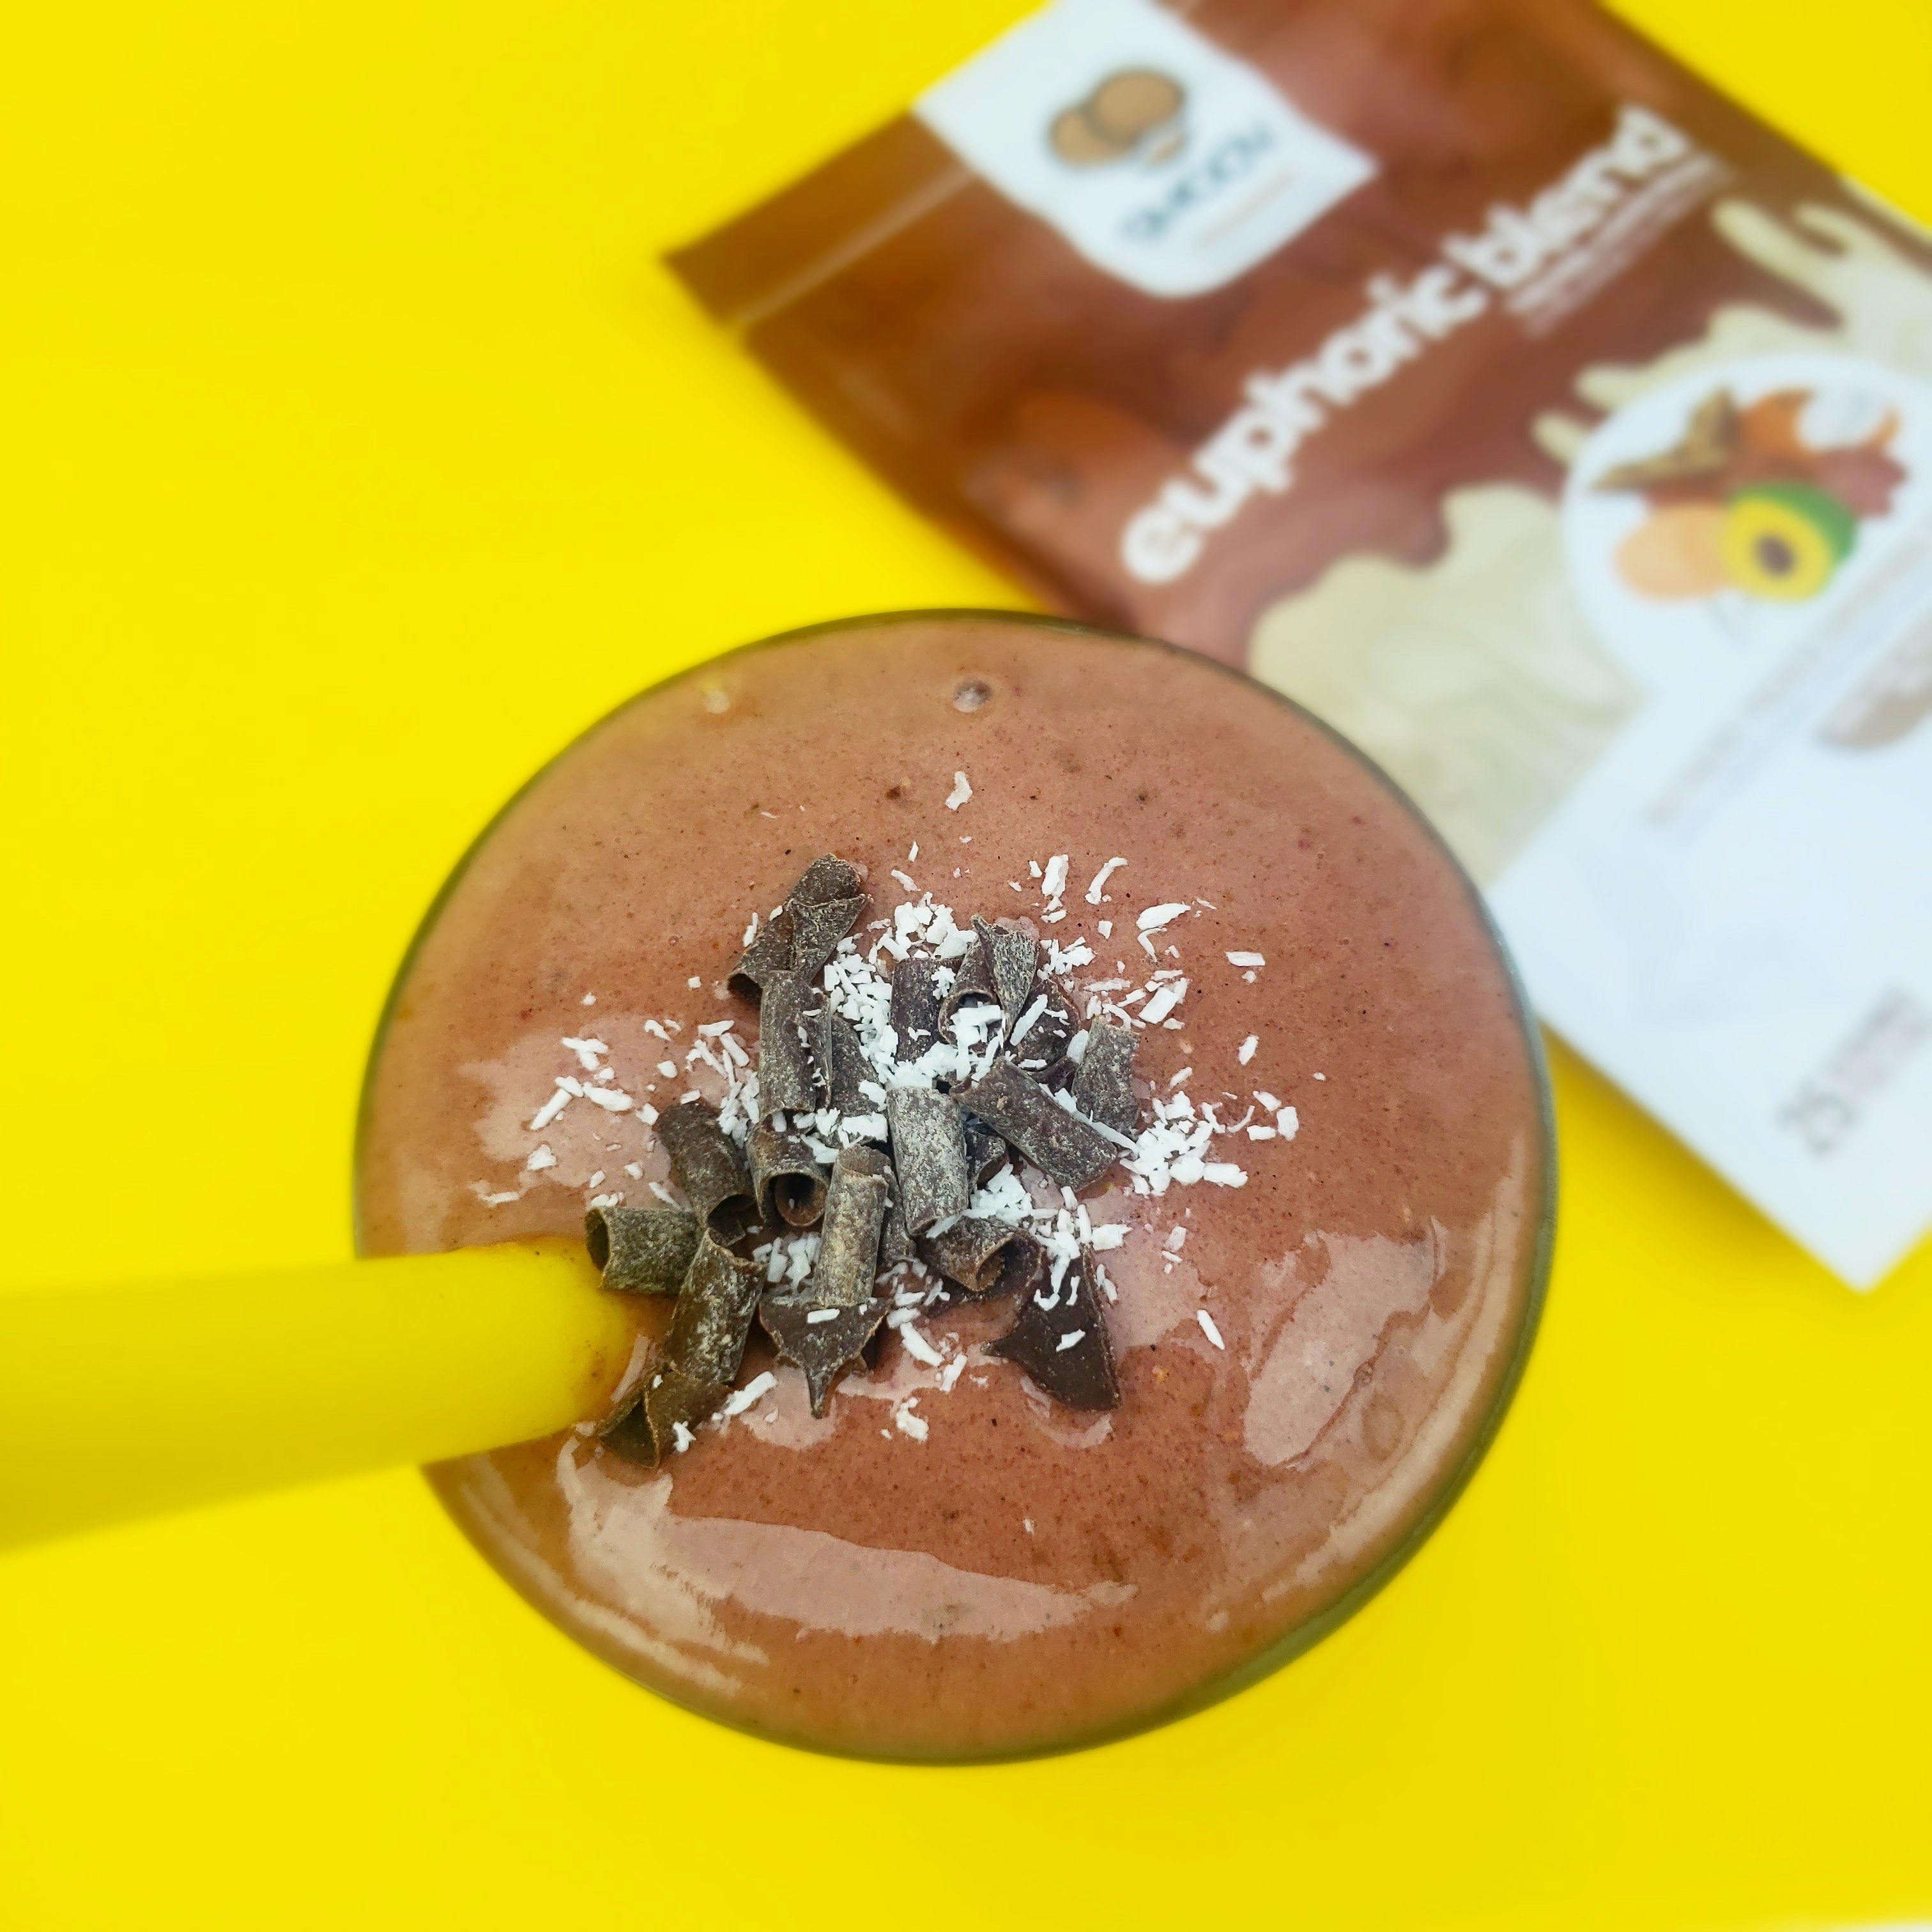 Smoov Euphoric Blend - Low calorie, low sugar chocolate superfoods